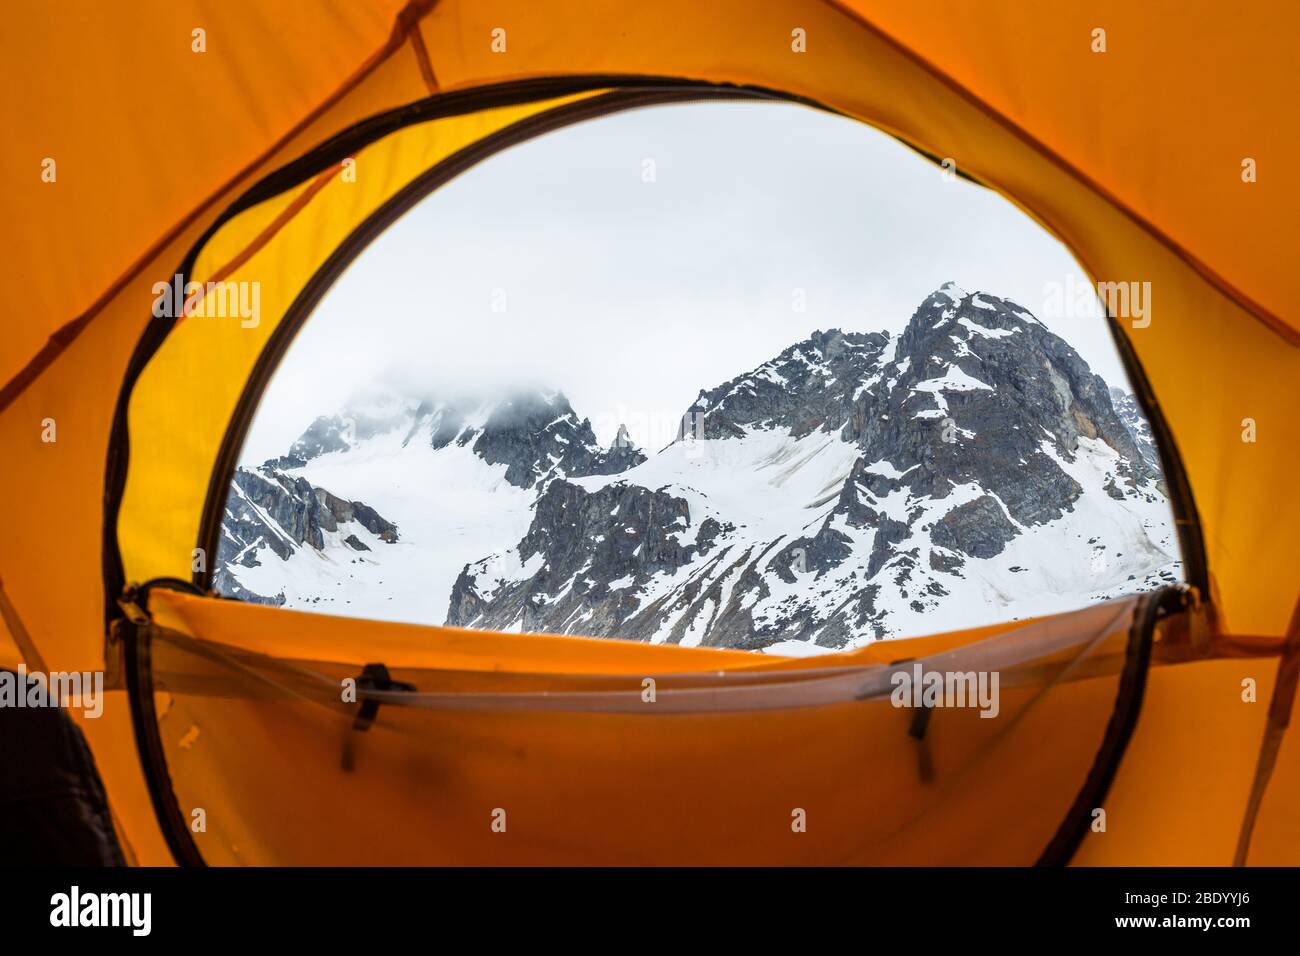 Looking out of a large yelow dome tent shelter at a massive rocky peak shrouded in clouds in the Talkeetna Mountains of Alaska. Stock Photo